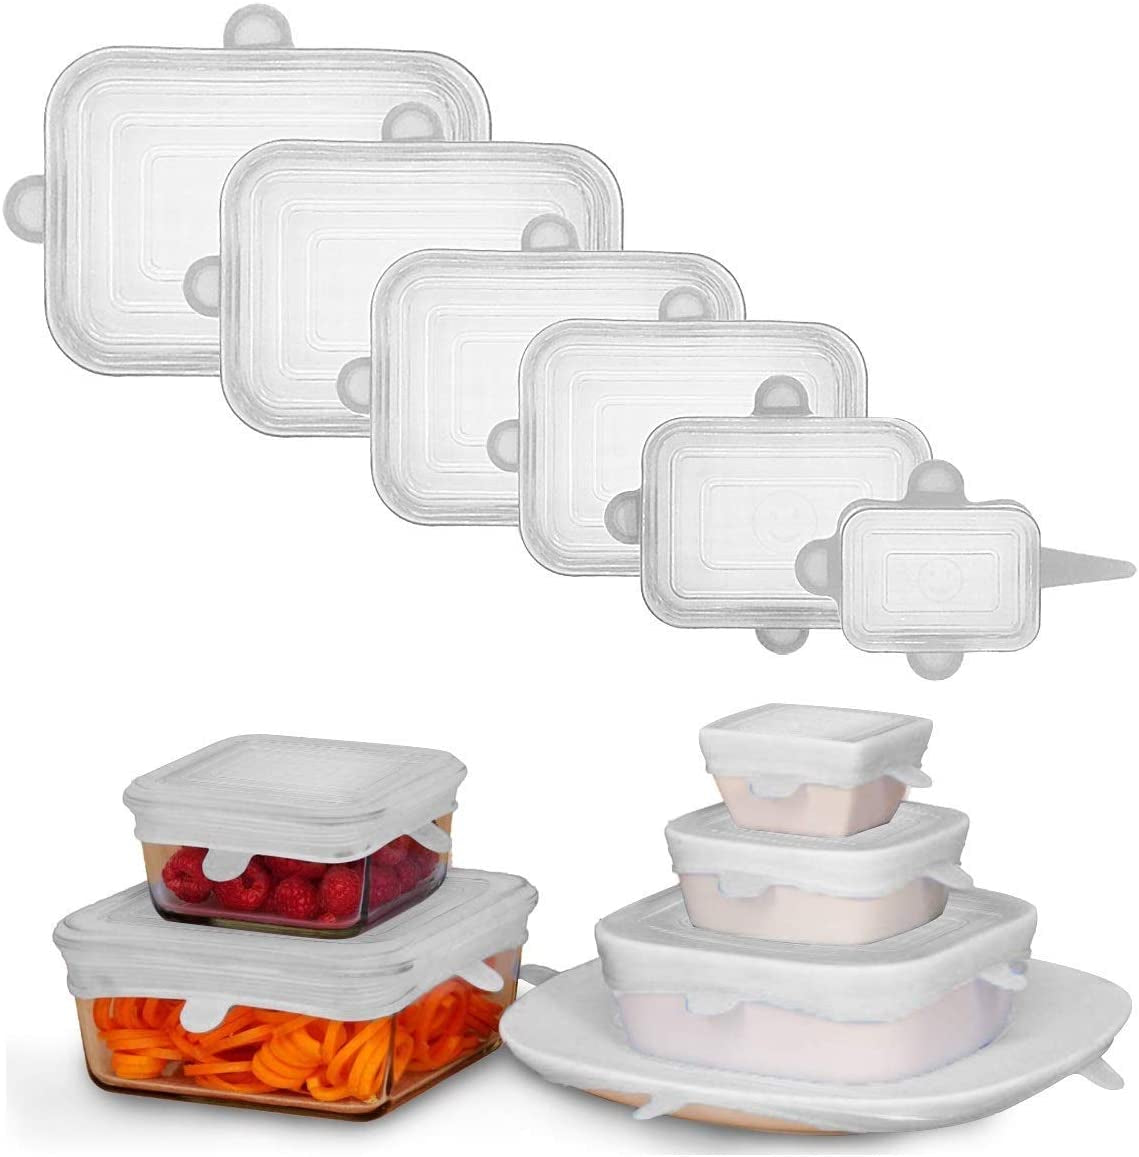 6PCS Rectangle Silicone Lids for Food Storage, Reusable Bpa-Free Silicone Stretch Lids in 6 Different Sizes to Fit Most Square and Rectangle Containers, Microwave Freezer Dishwasher Use Safe